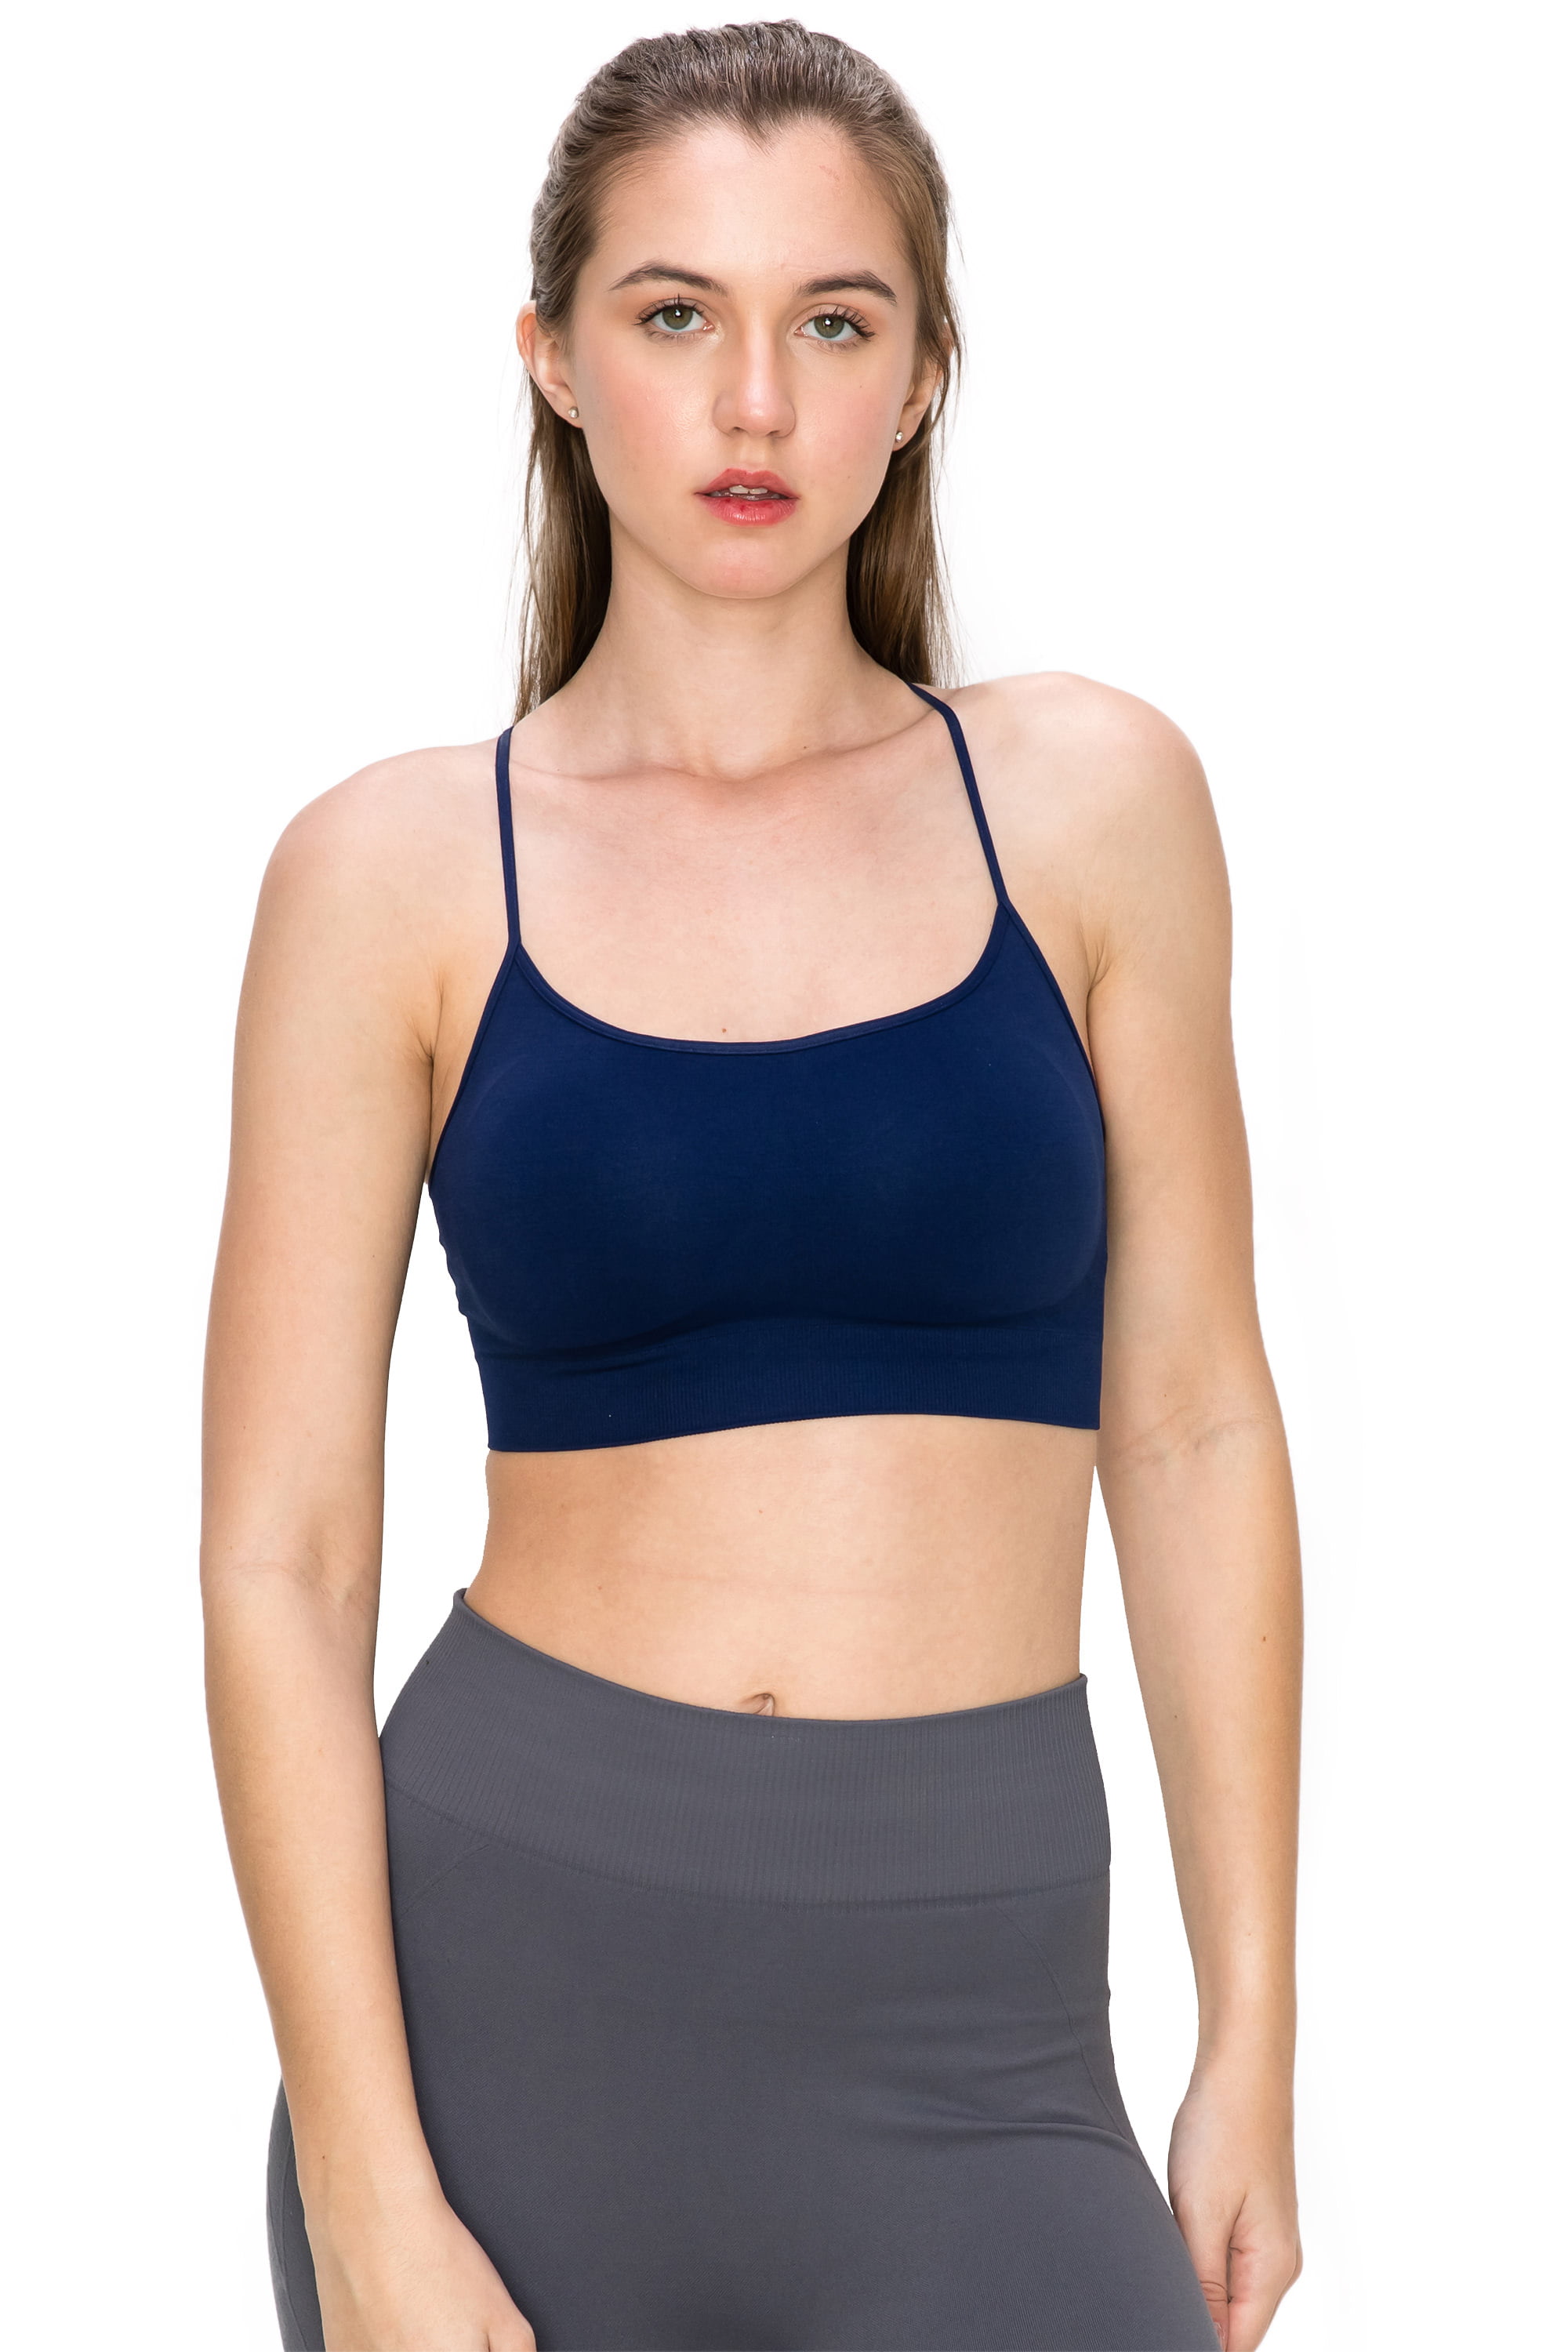 Kurve by Idea Women's Shelf Bras Padded Cami with Removable Pads, UV  Protective Fabric UPF 50+ (Made with Love in The USA), S/M 